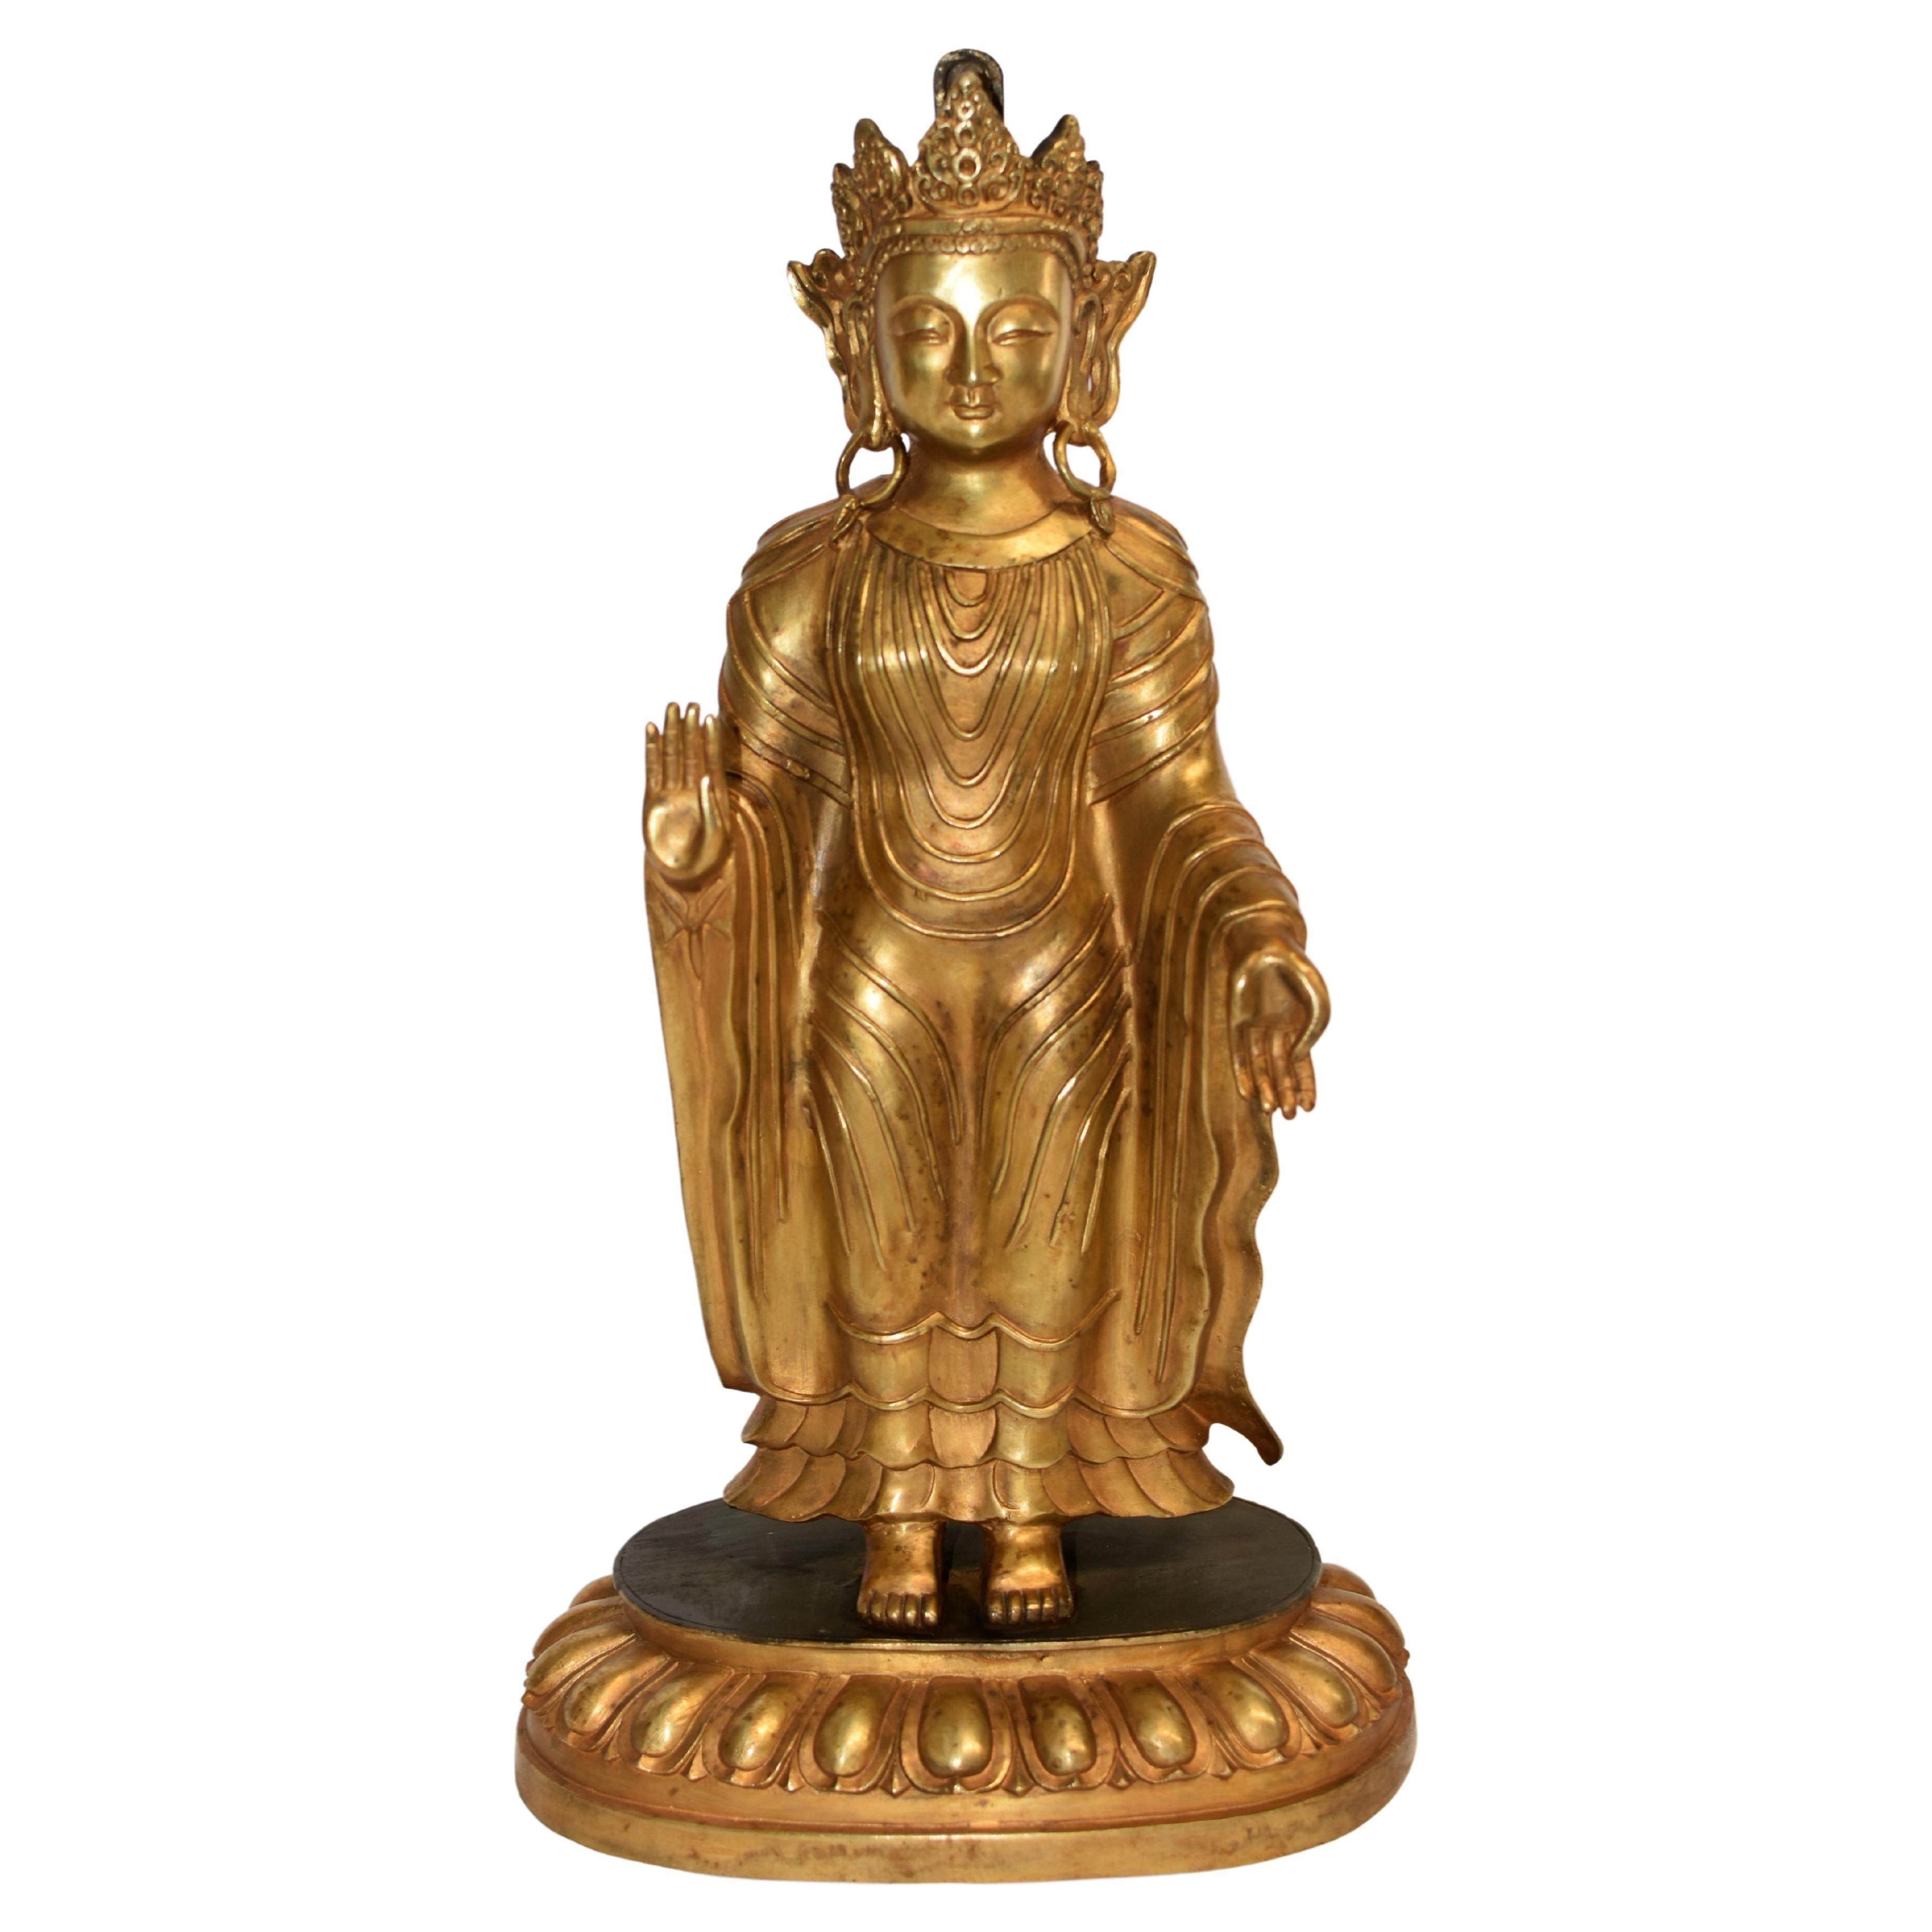 A large, 11 lb, gilt bronze Tibetan Buddha statue of superb quality. Standing on lotus plinth with the 